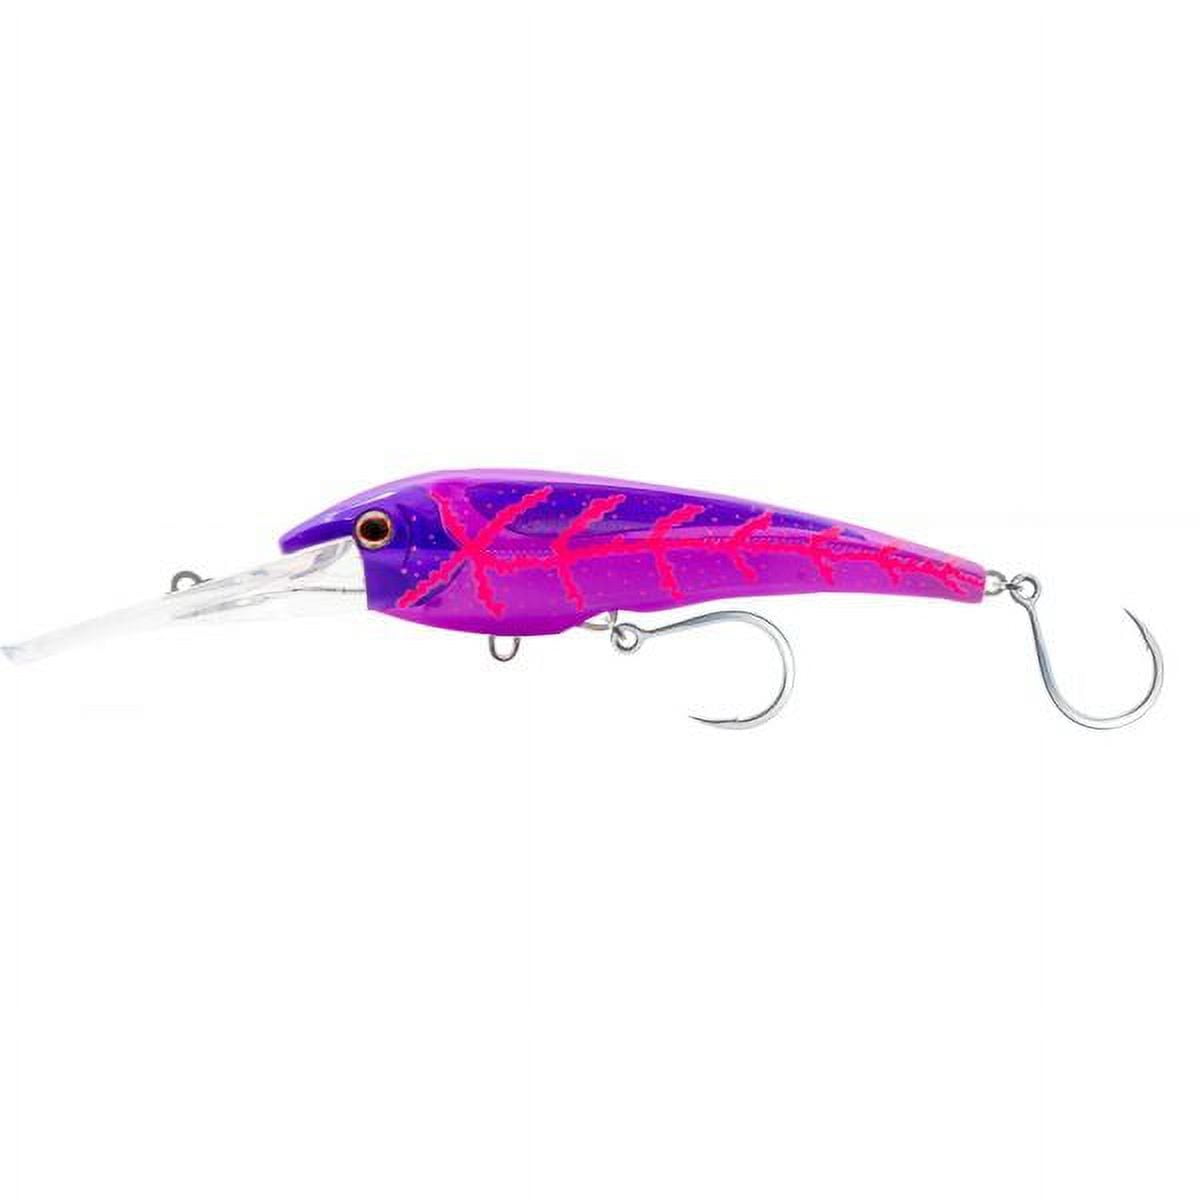 Nomad DTX Minnow 165mm 6.5 Trolling Lures – White Water Outfitters